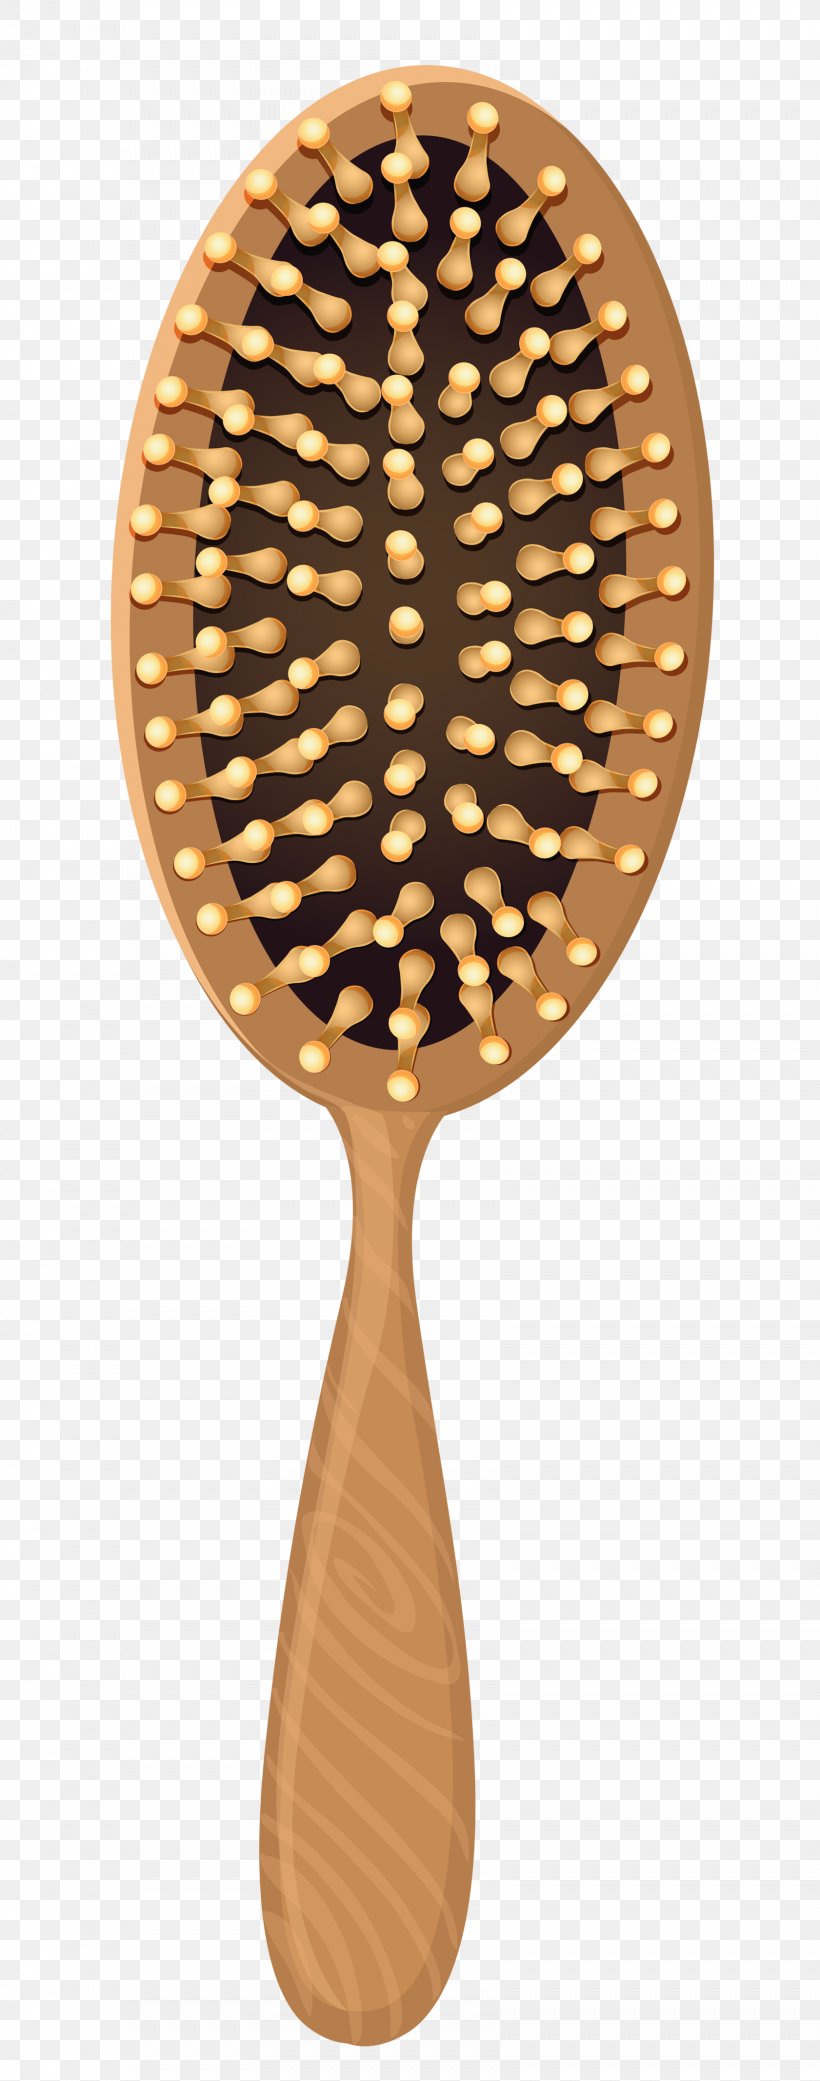 Comb Hair Clipper Hairbrush Hair Dryers Clip Art, PNG, 1681x4268px, Comb, Brush, Hair, Hair Care, Hair Clipper Download Free